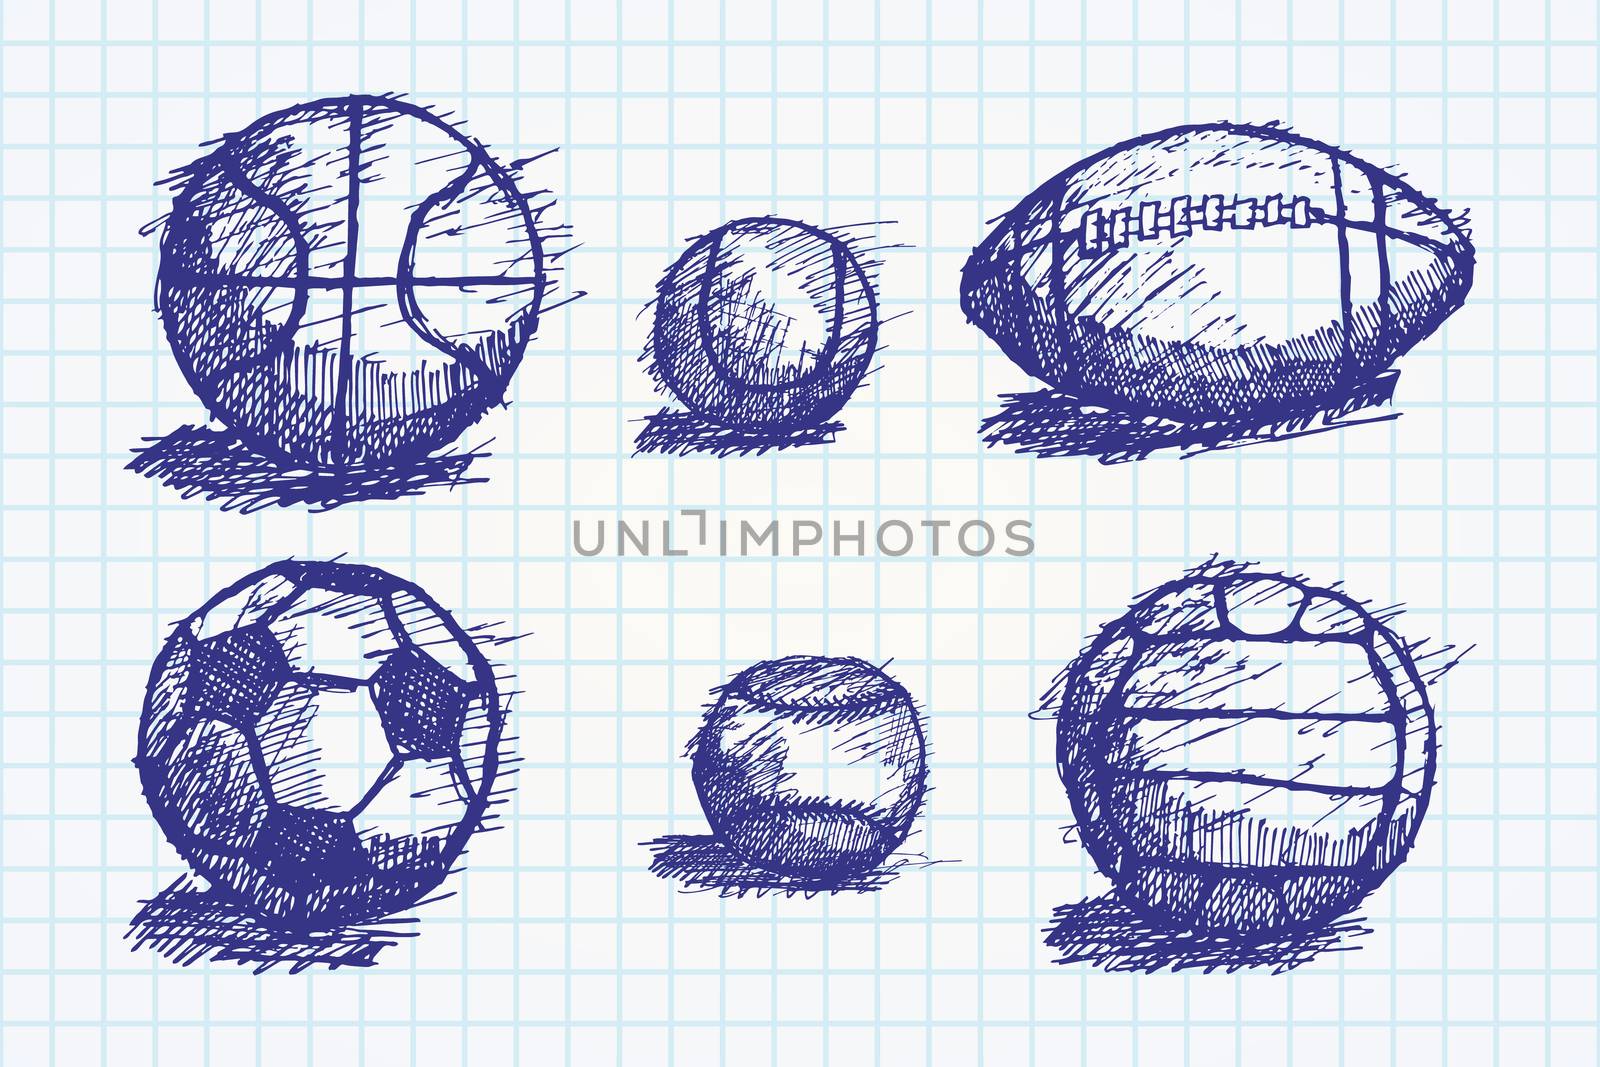 Ball sketch set with shadow on the ground on paper notebook by Lemon_workshop